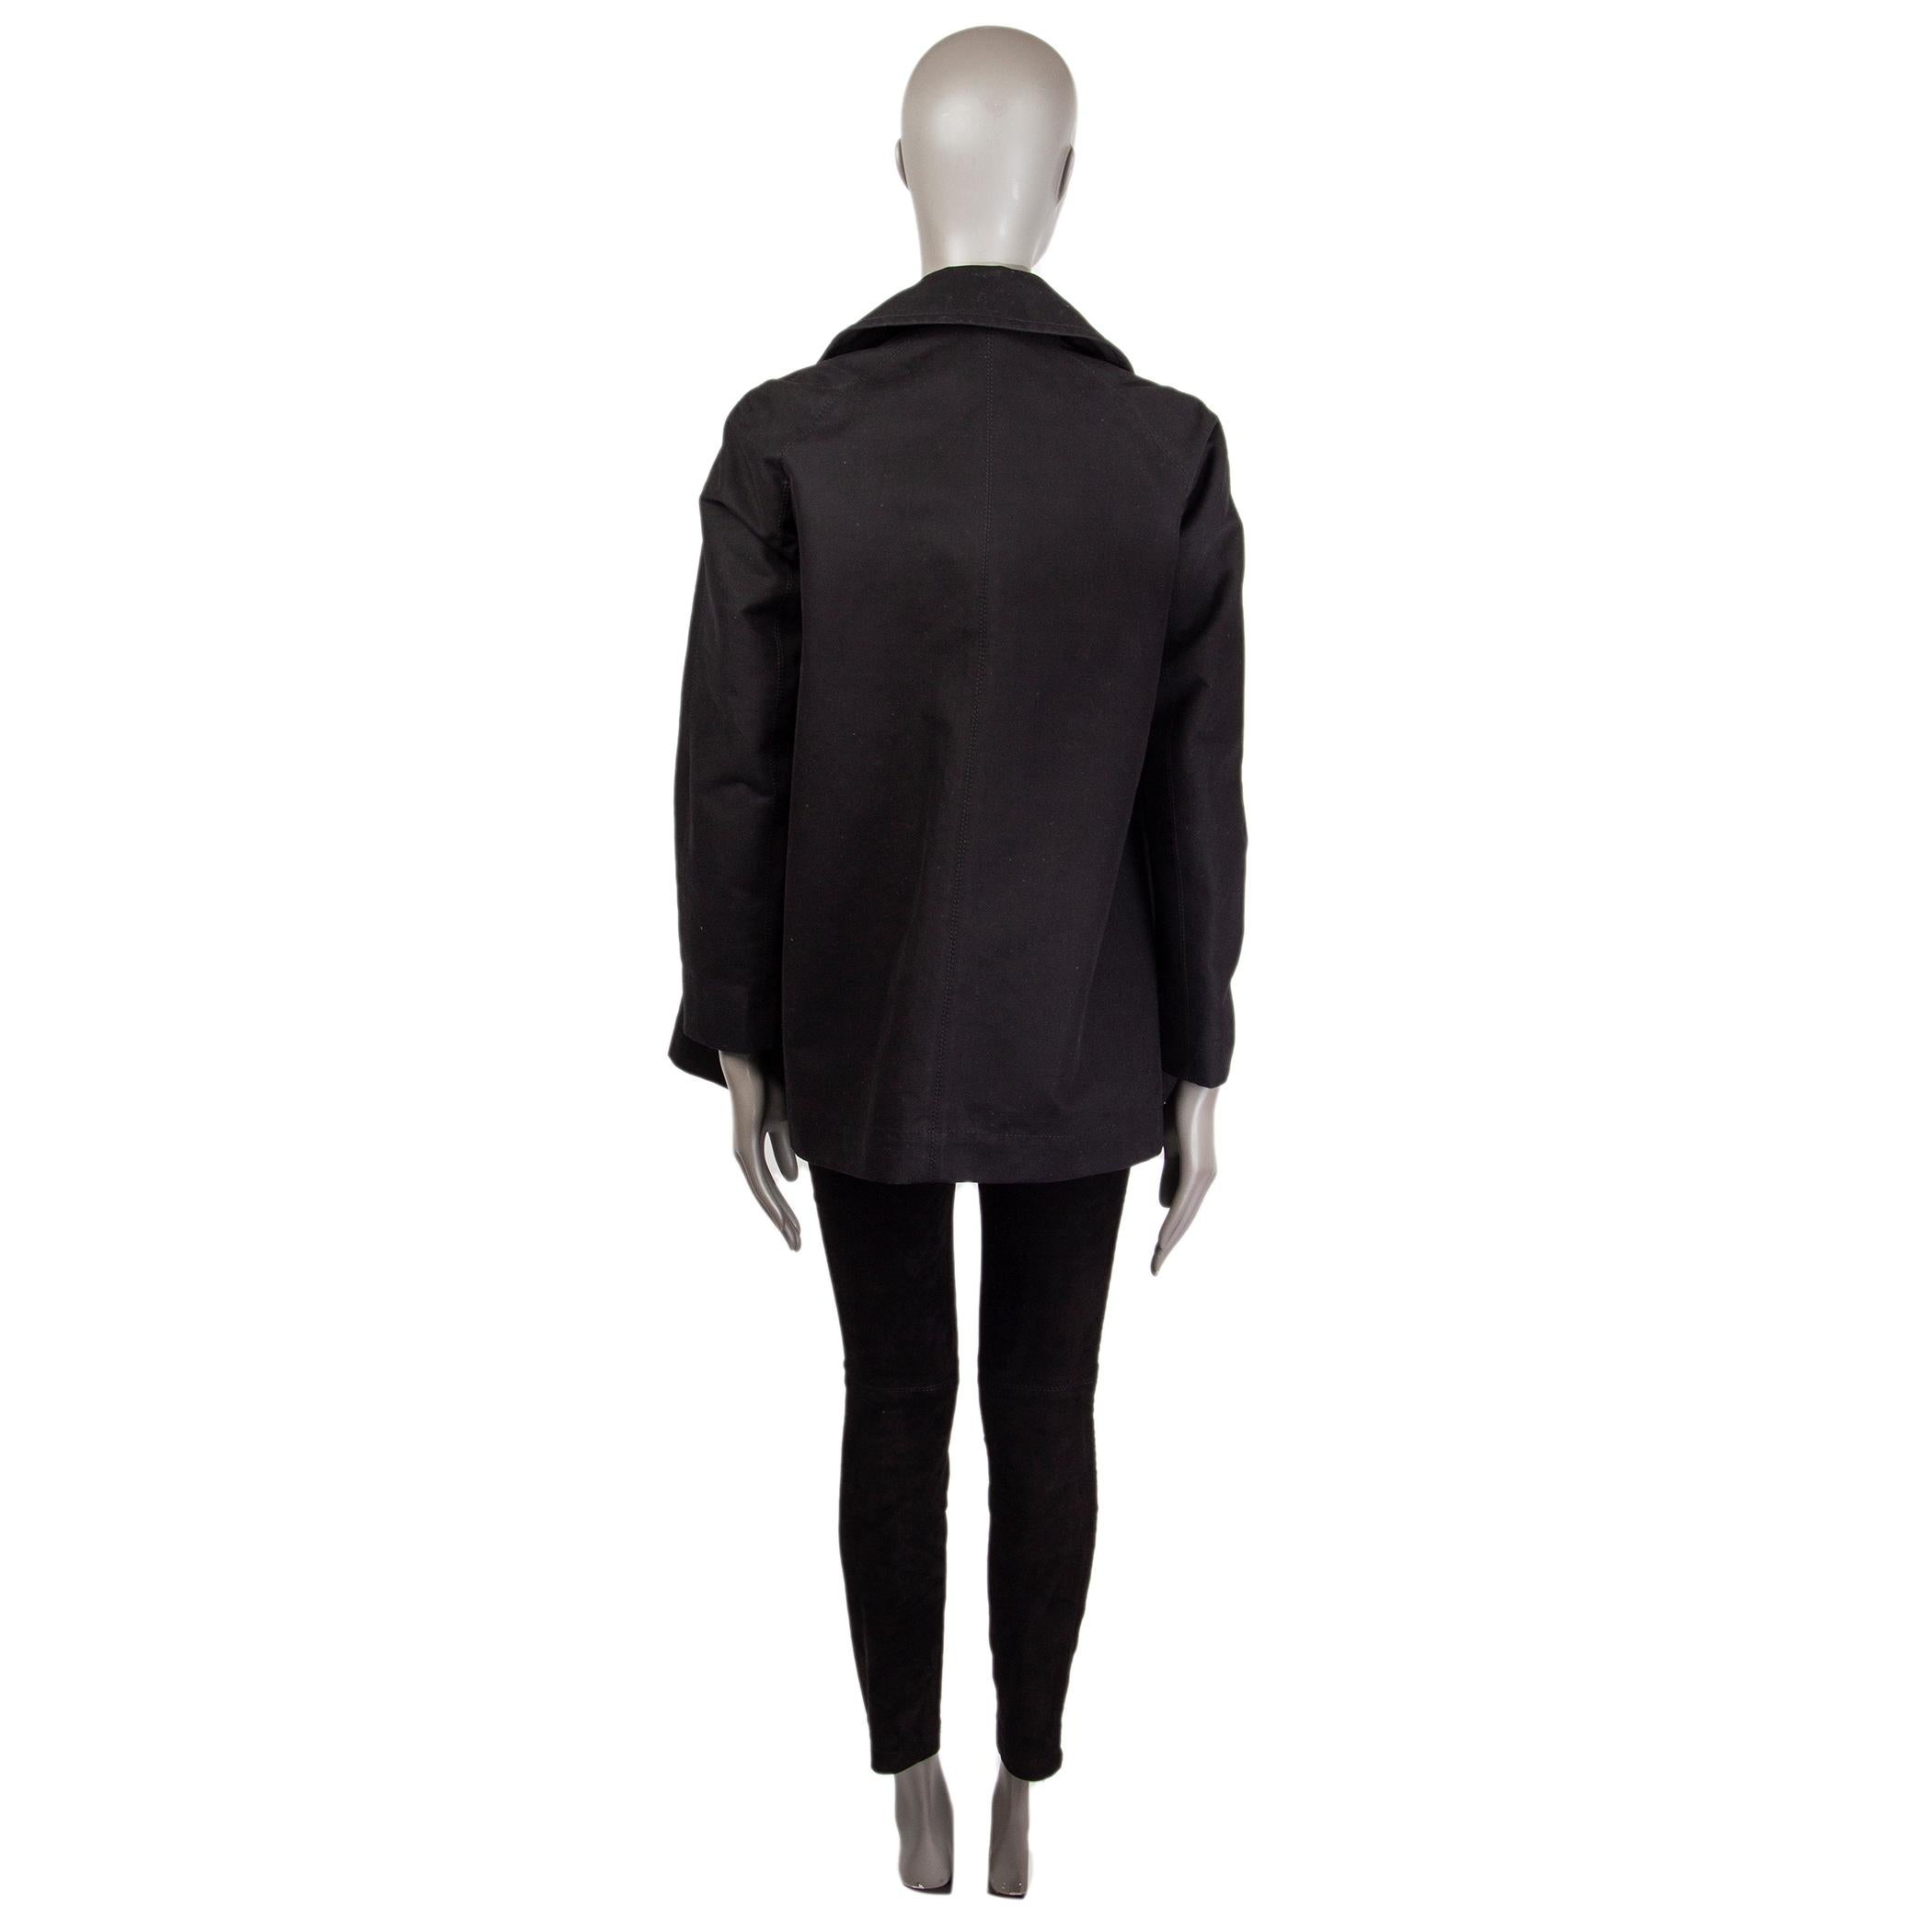 100% authentic The Rowdouble-breated gabardine coat in black cotton (100%). With noch collar and two pockets on the front. Closes with concealed buttons on the front. Partially lined in black cupro (100%). Has been worn and is in excellent